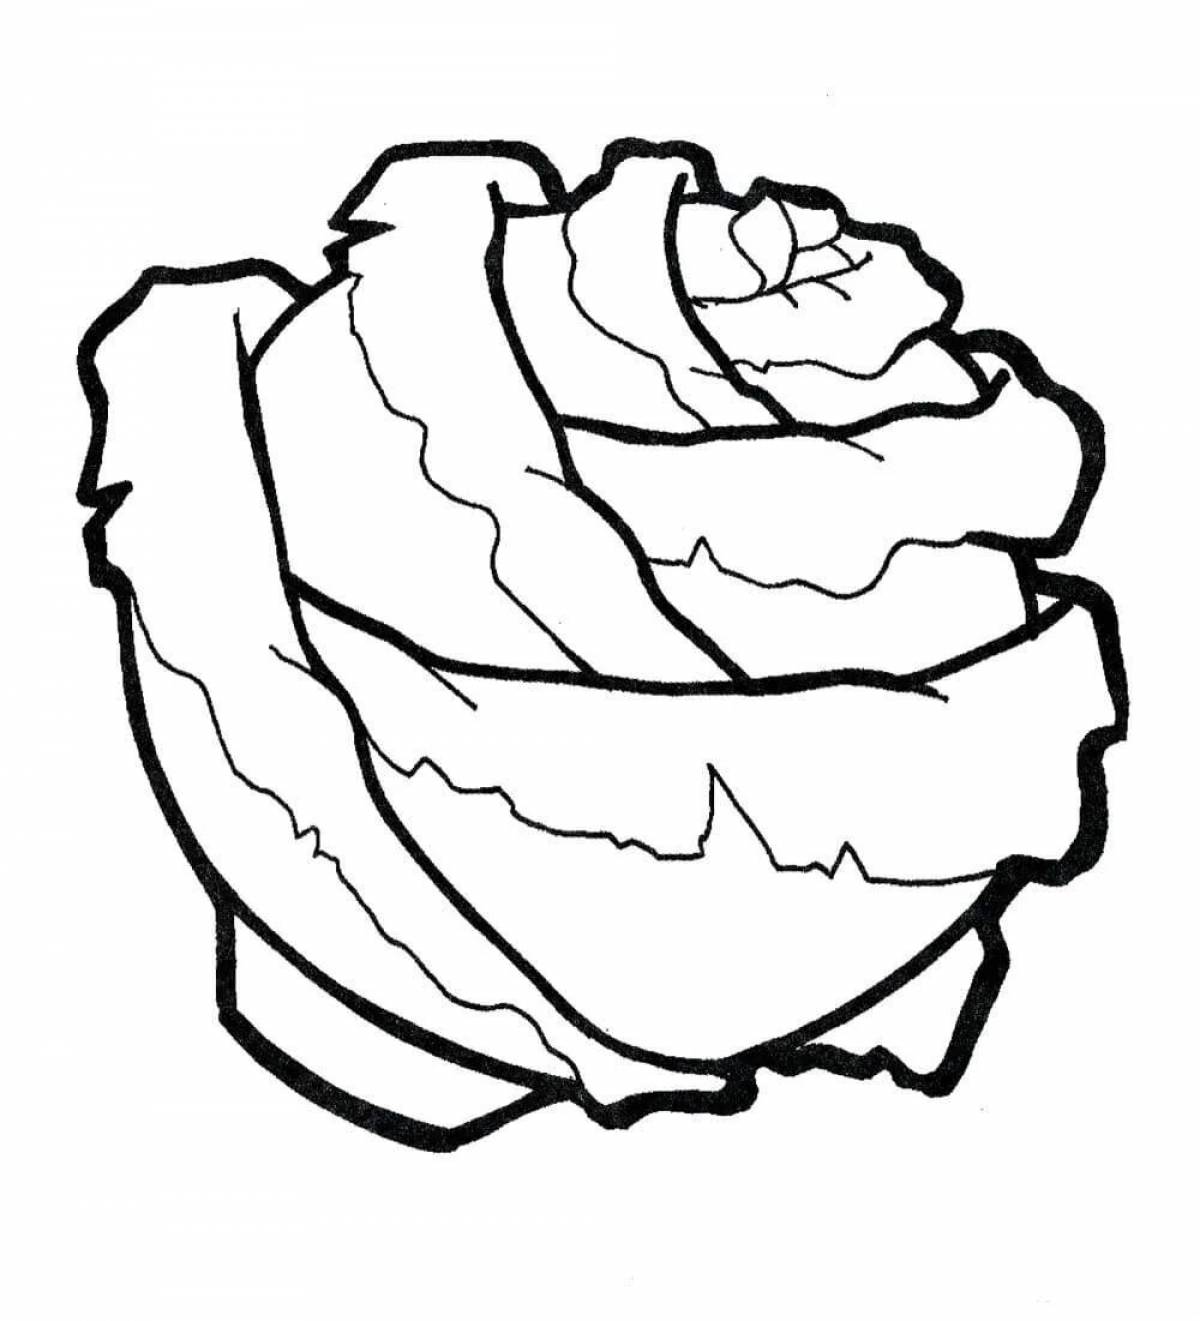 Cute cabbage coloring page for 3-4 year olds